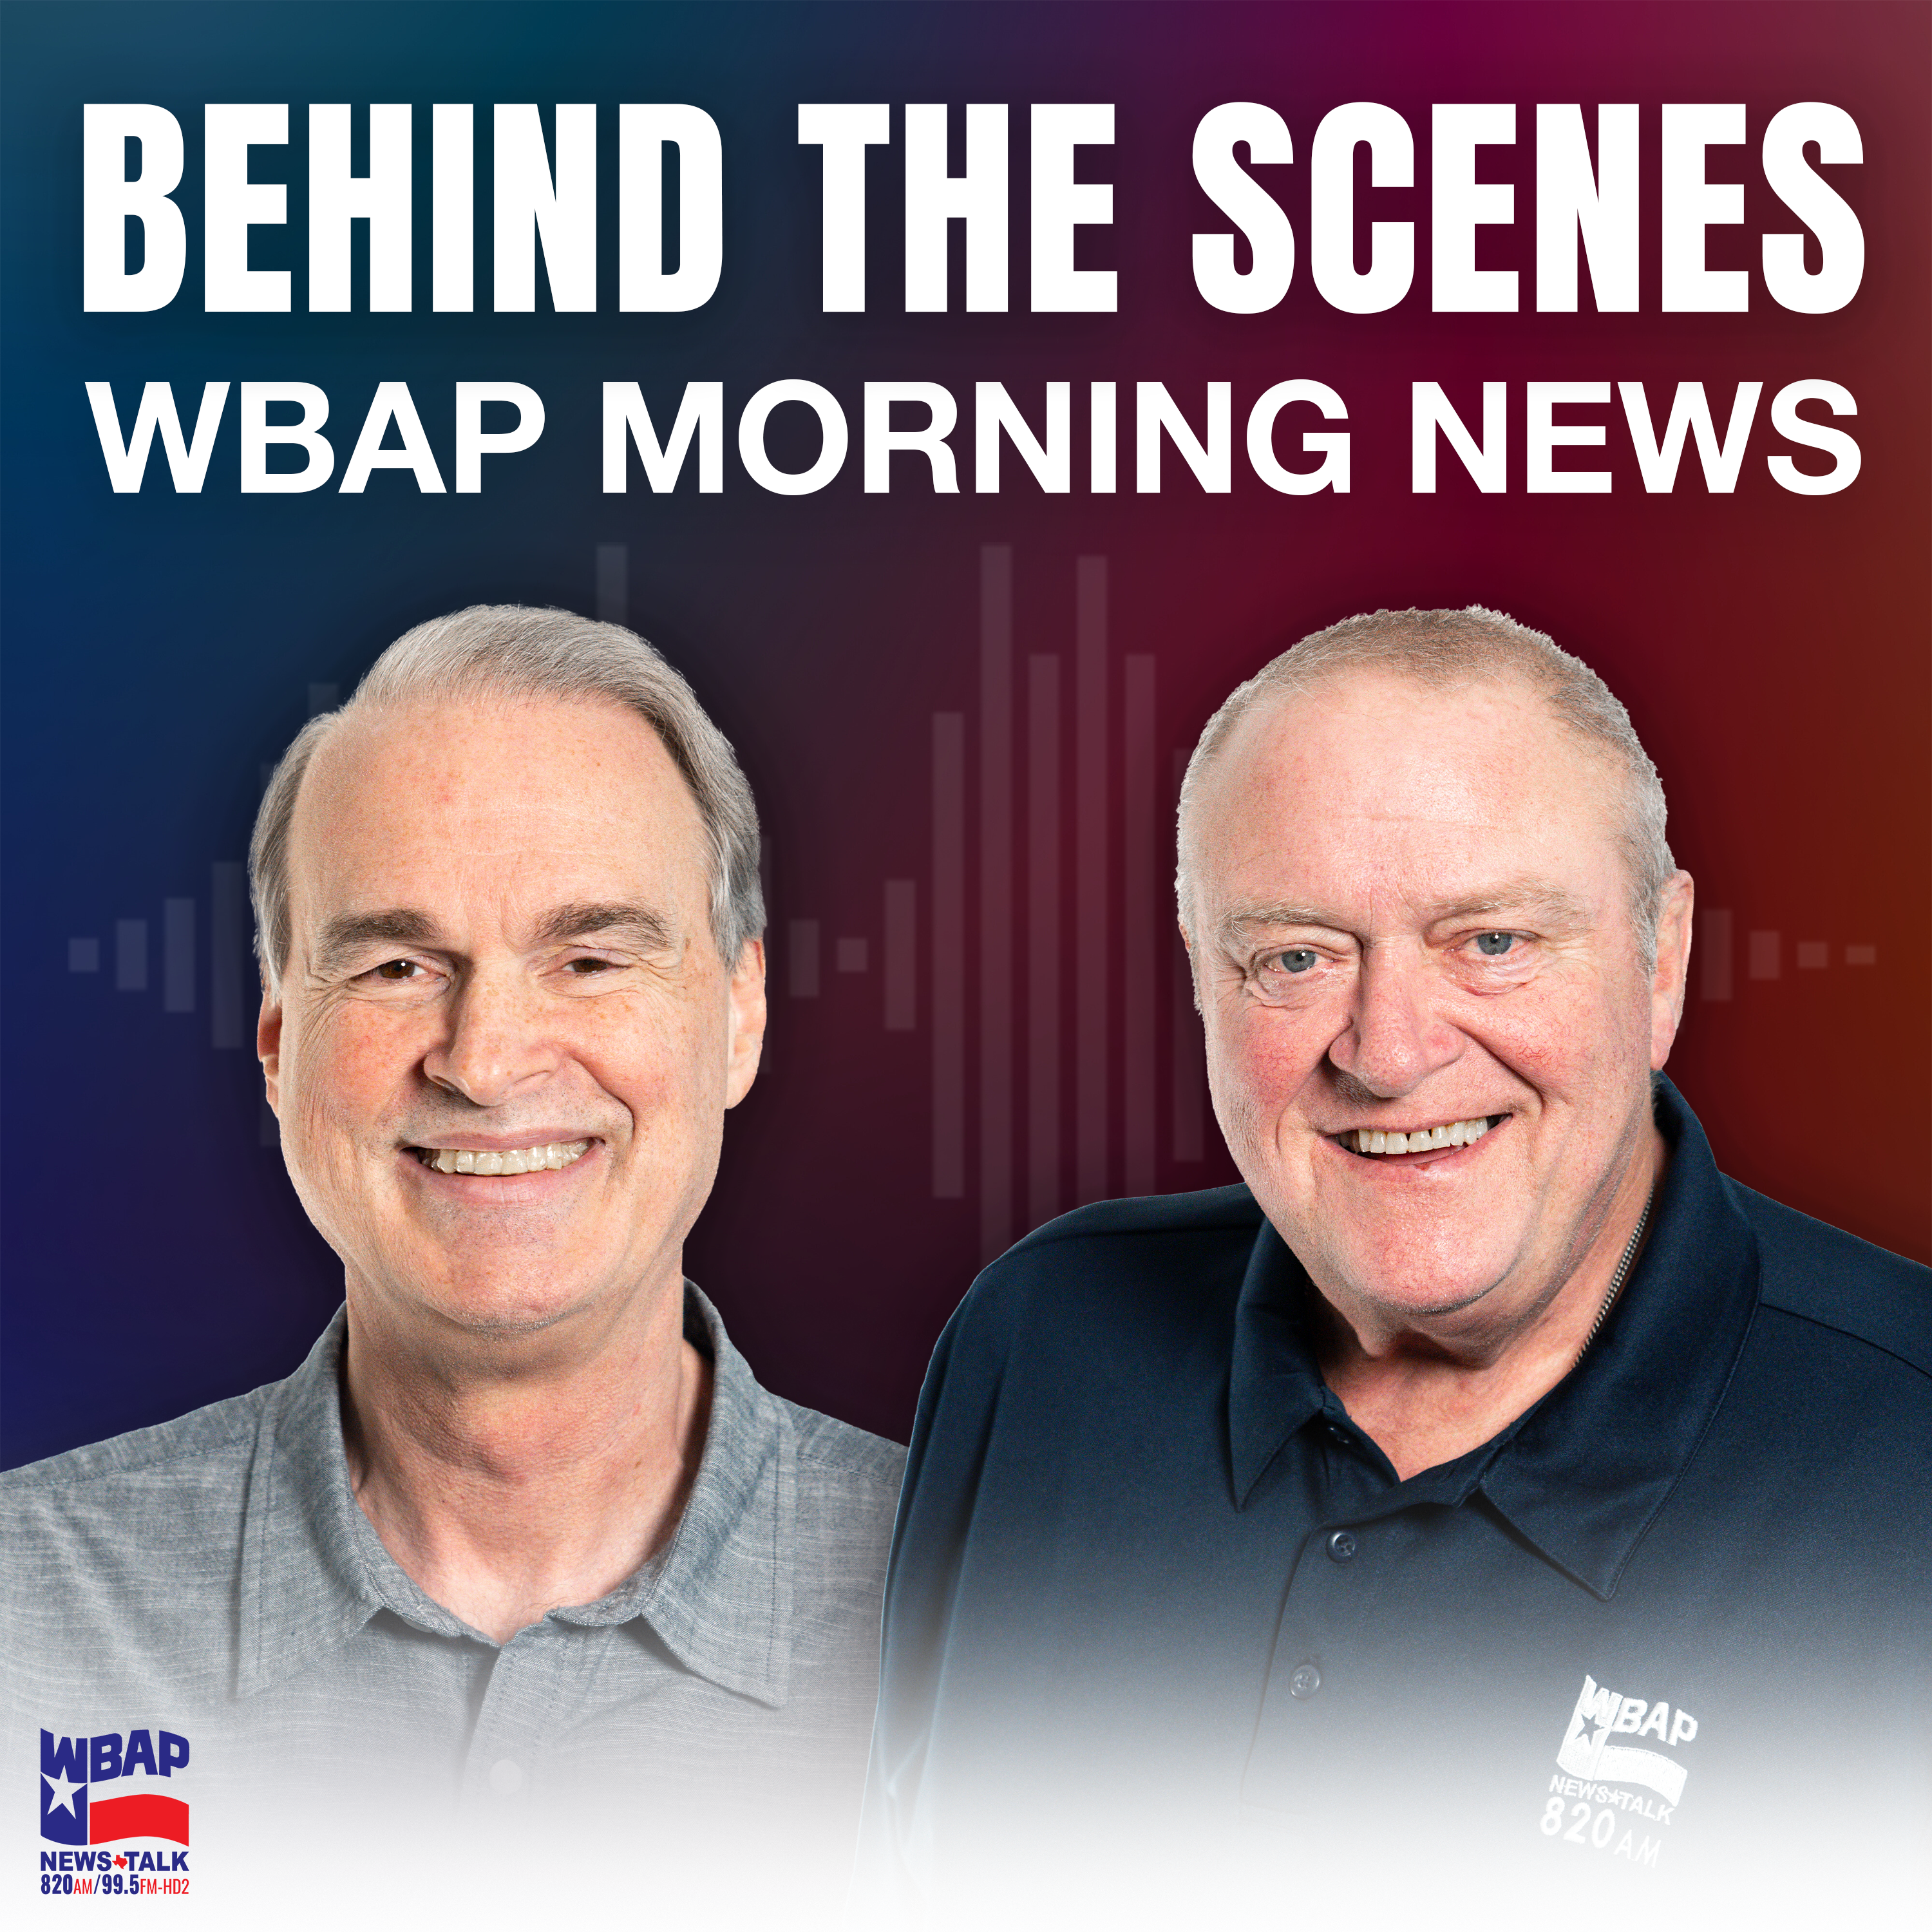 Behind The Scenes: WBAP Morning News